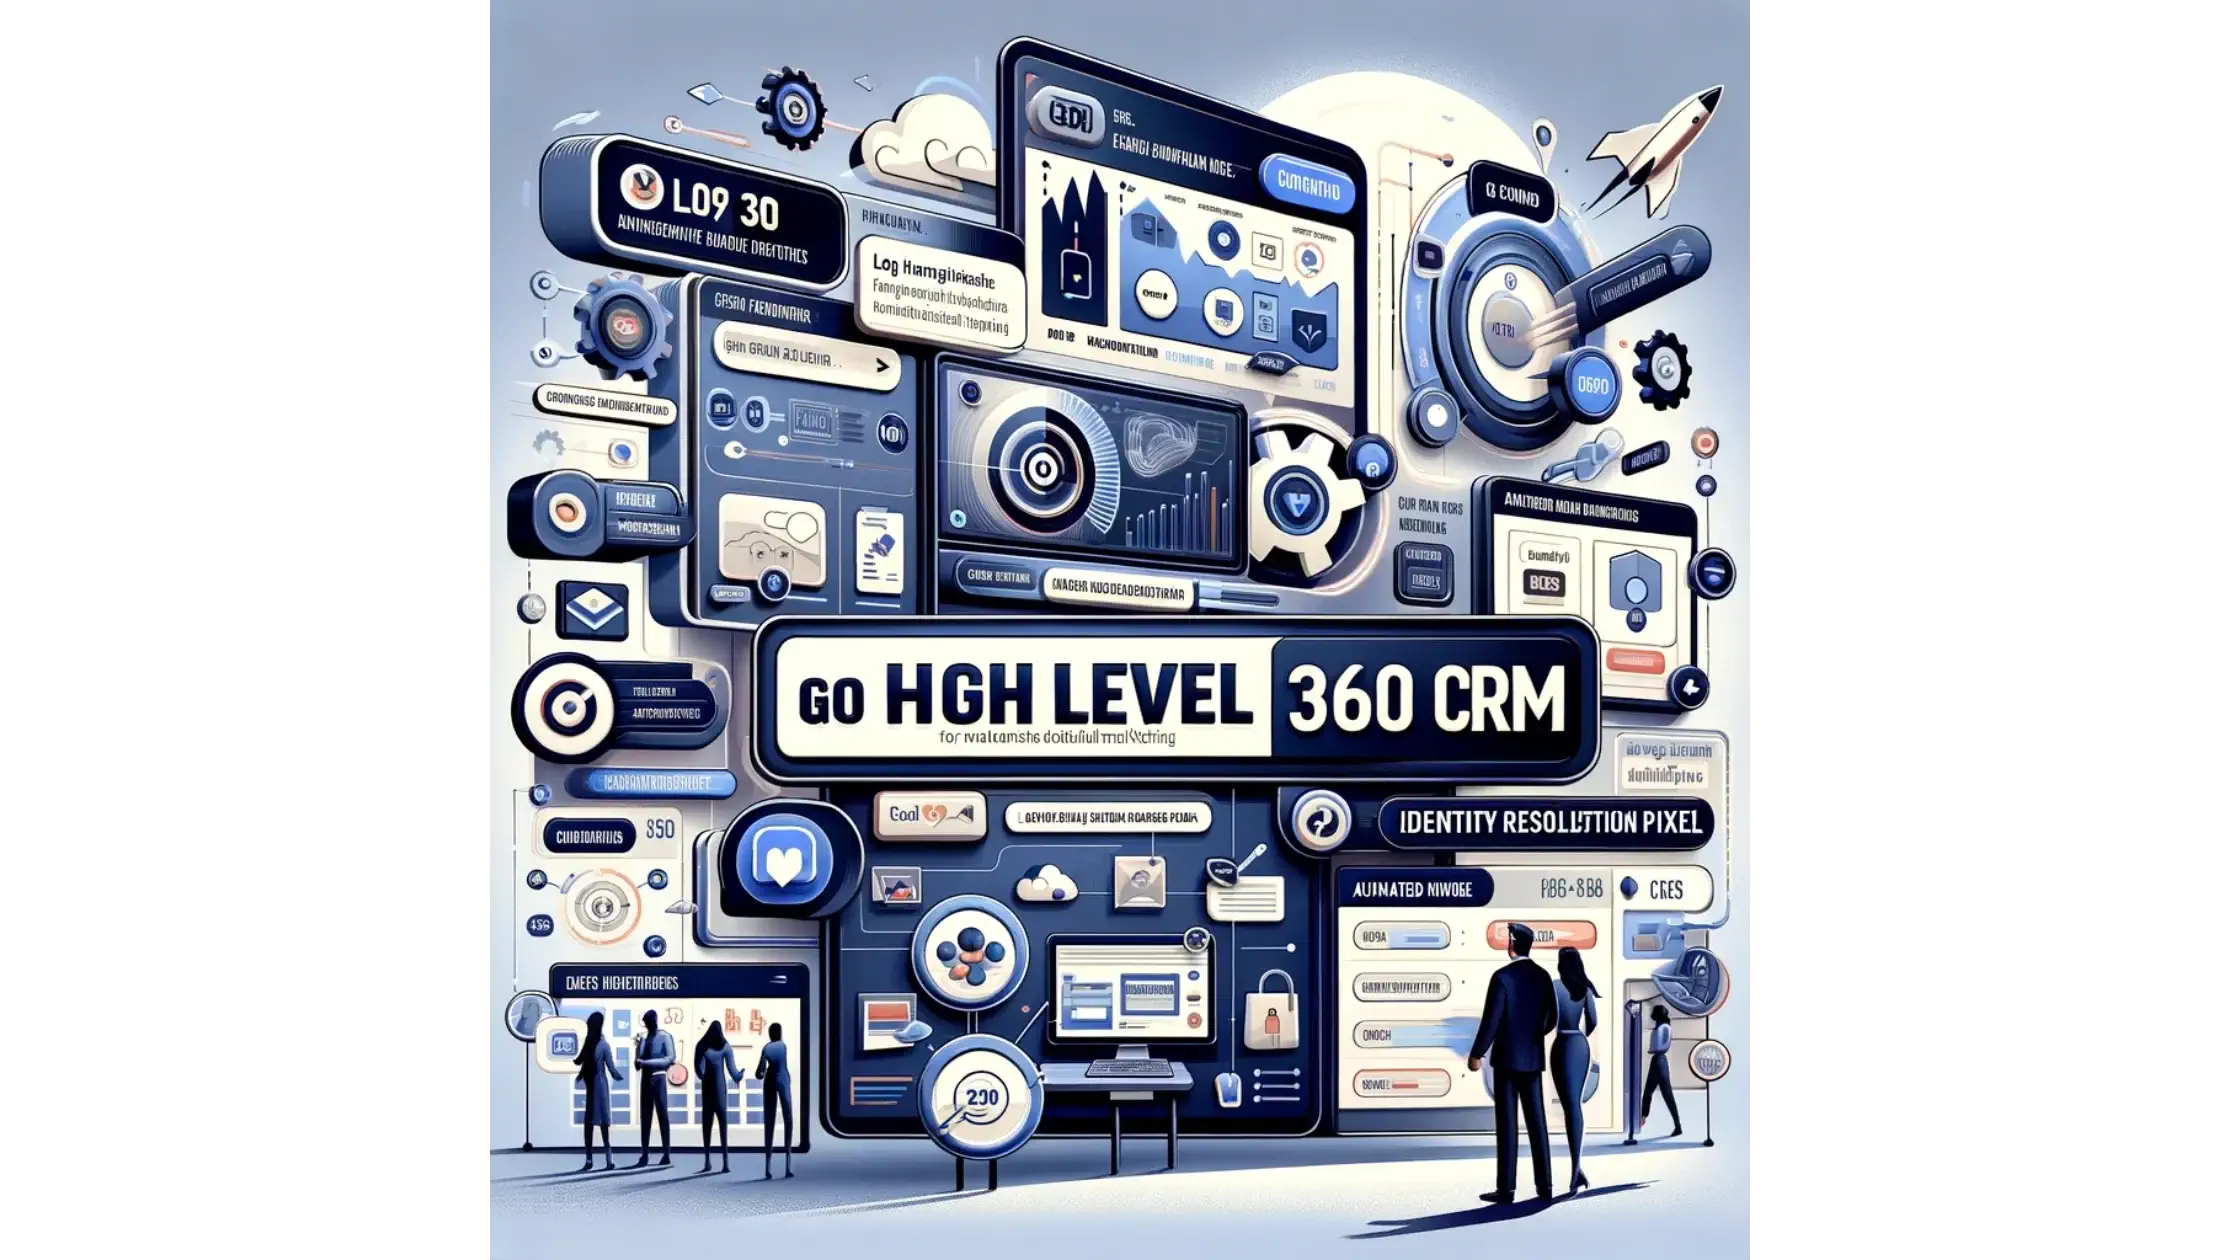 Go High Level 360 Infographic illustrating all the valued features of the CRM